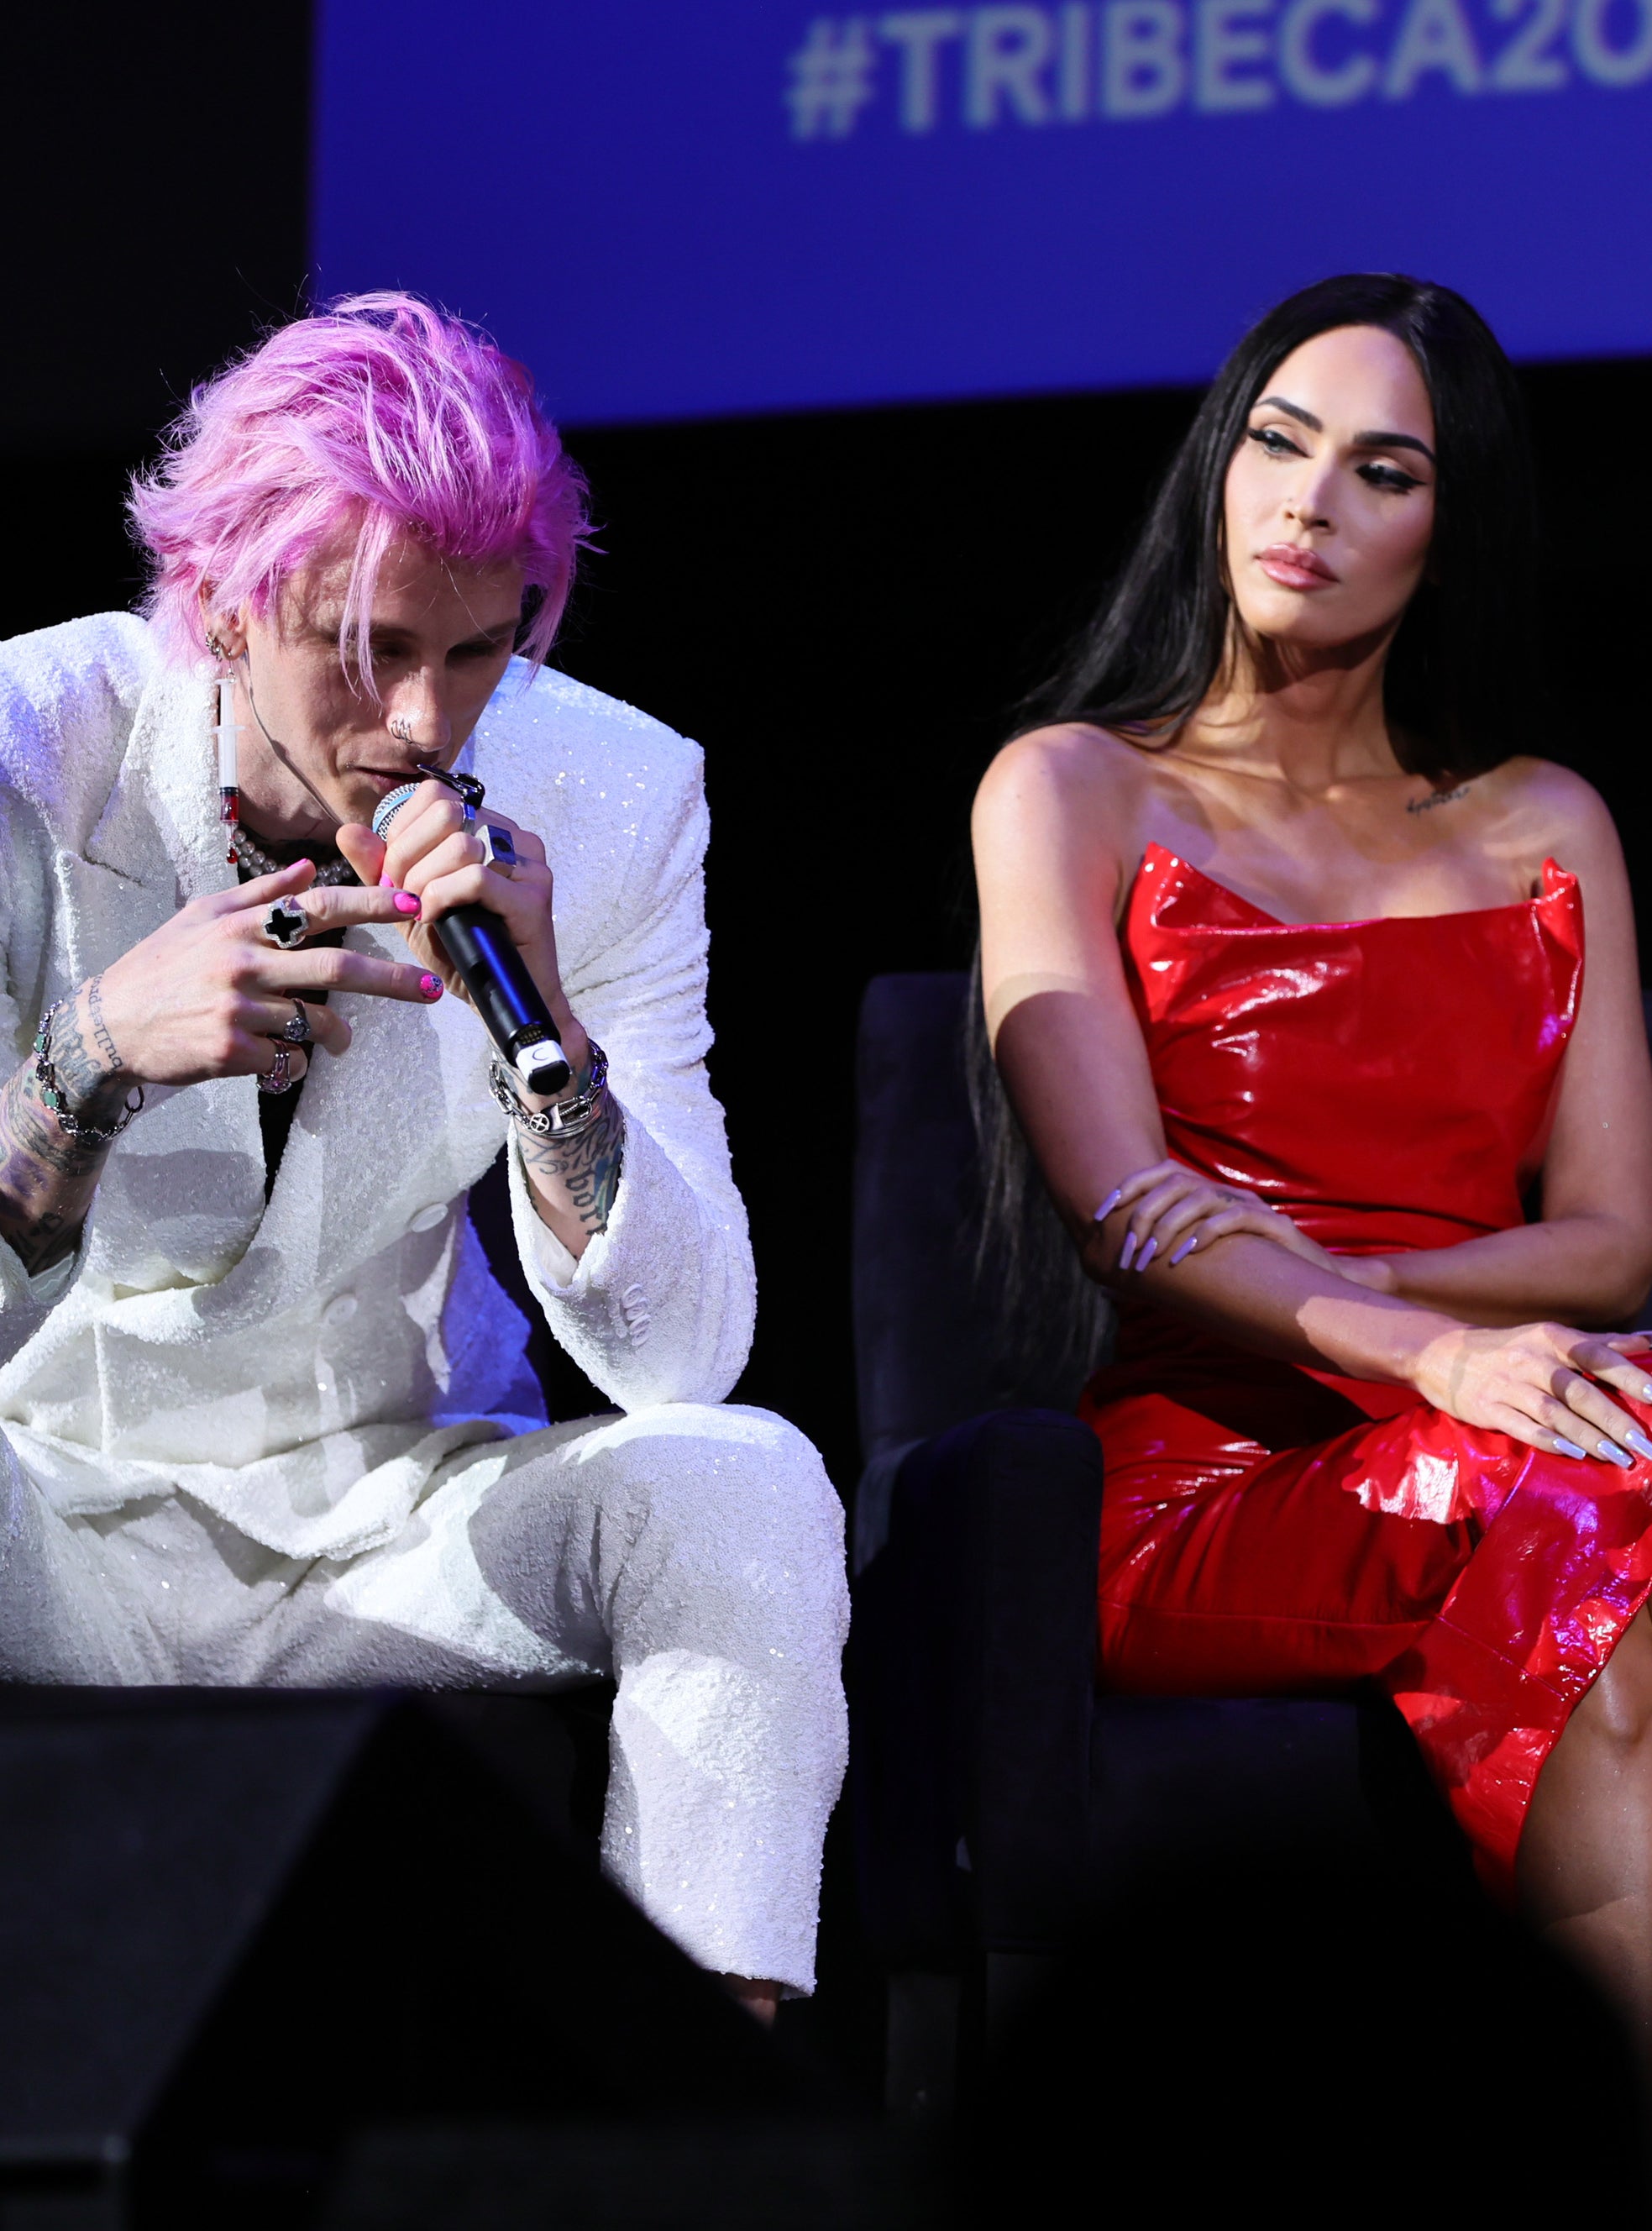 MGK in a white outfit and Megan in a shiny red dress sitting onstage, both with microphones; #TRIBECA2022 sign in view